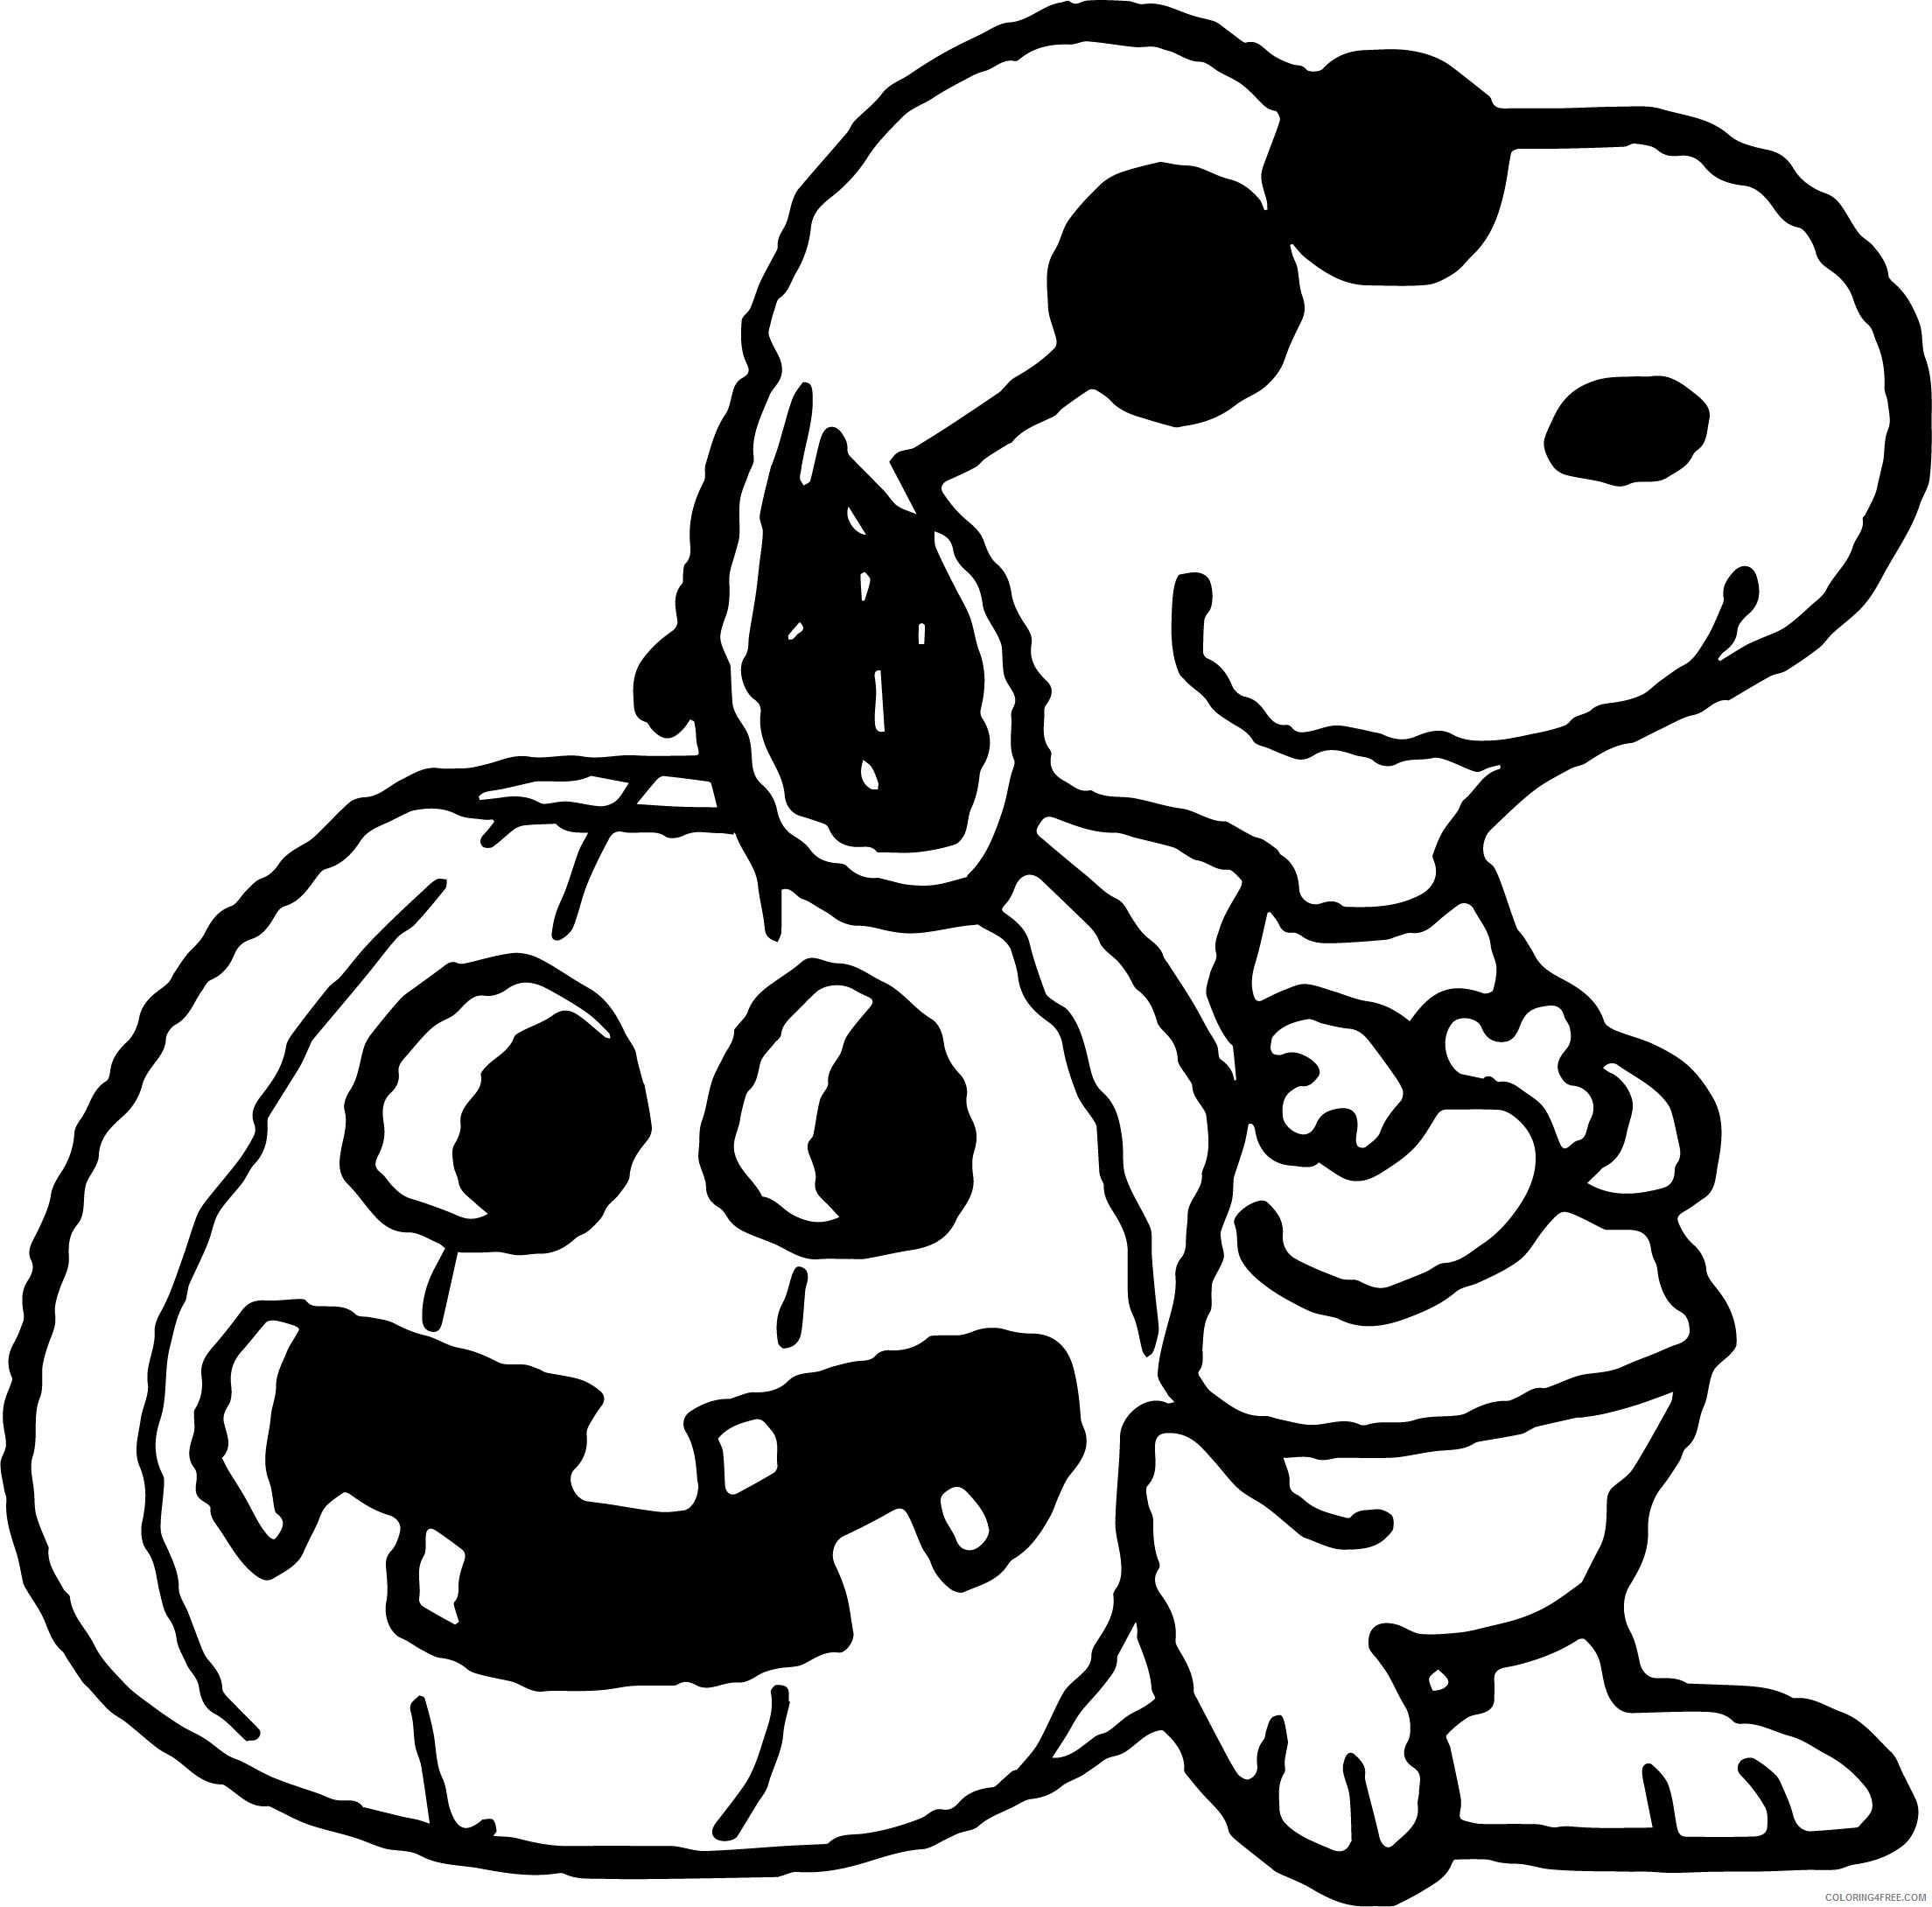 Snoopy Coloring Pages Cartoons Snoopy and Halloween Pumpkin Printable 2020 5651 Coloring4free